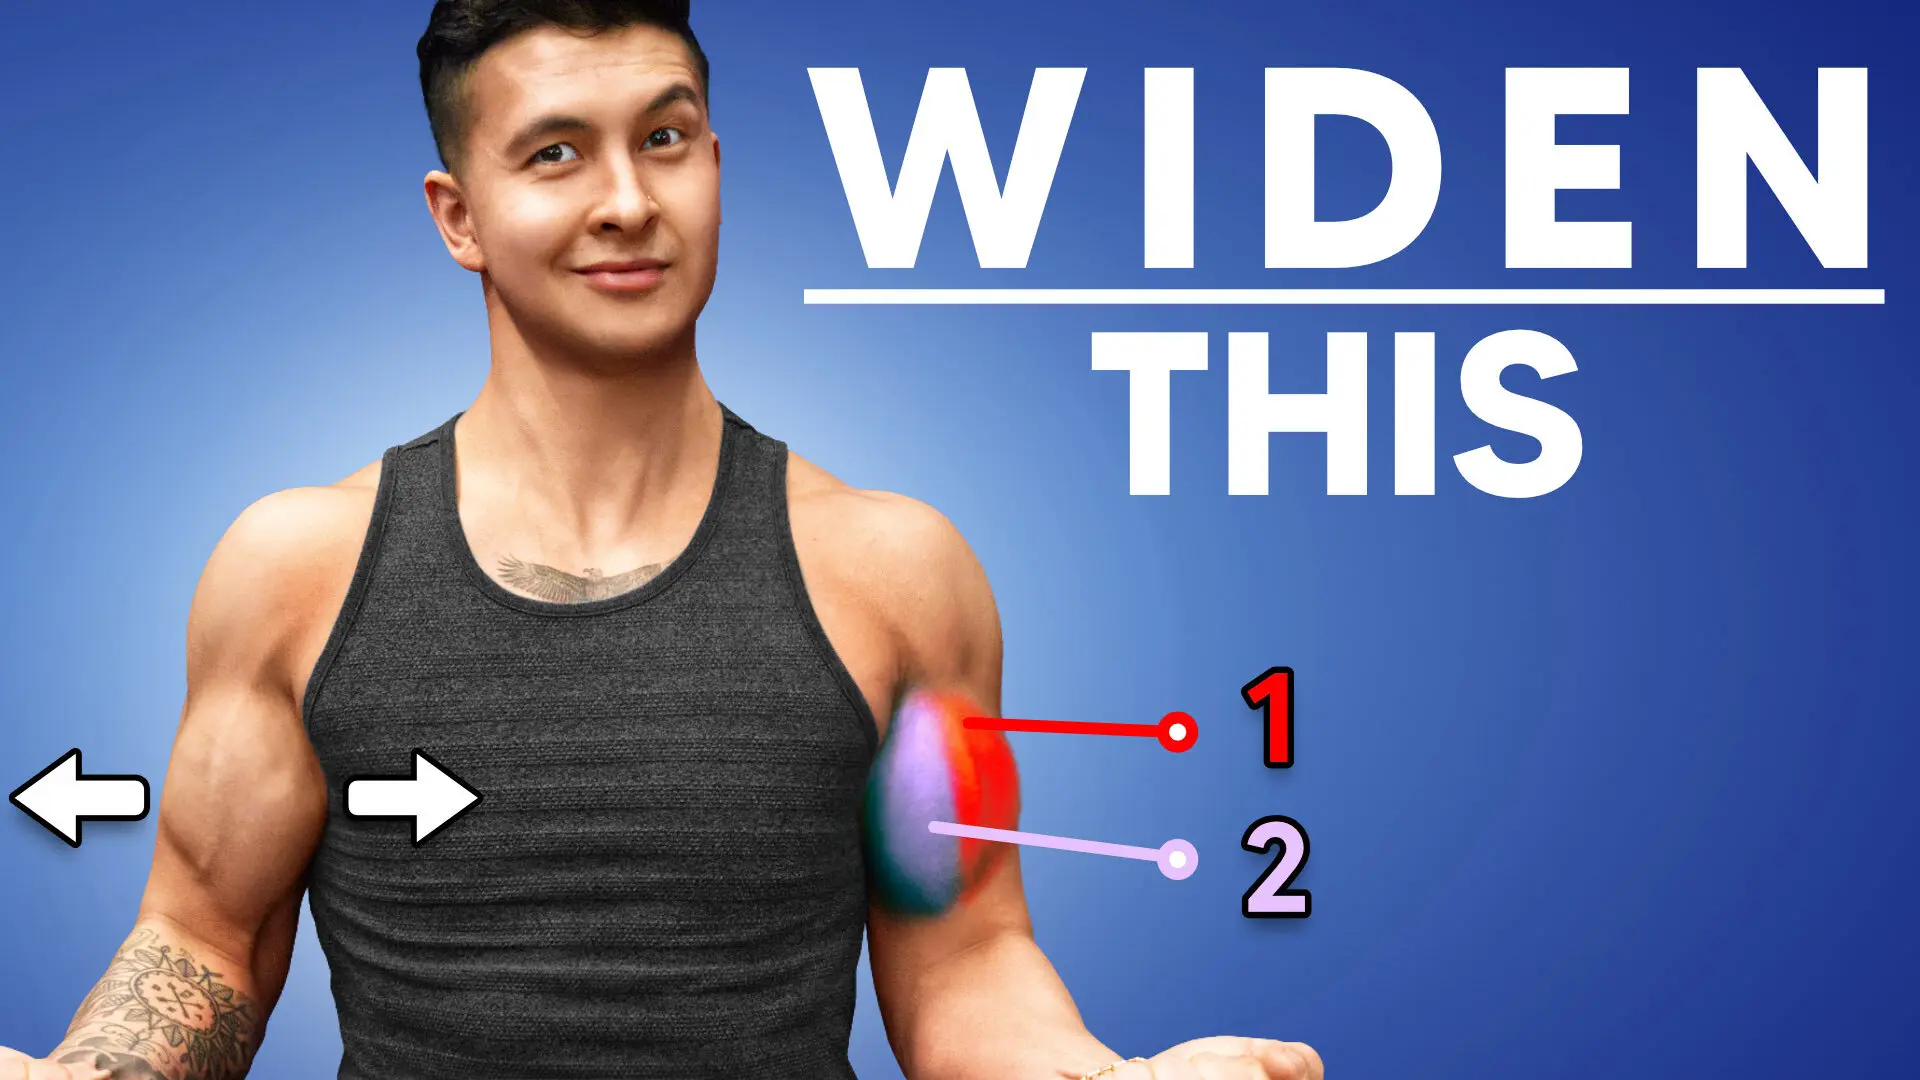 Wider-biceps-cover-image